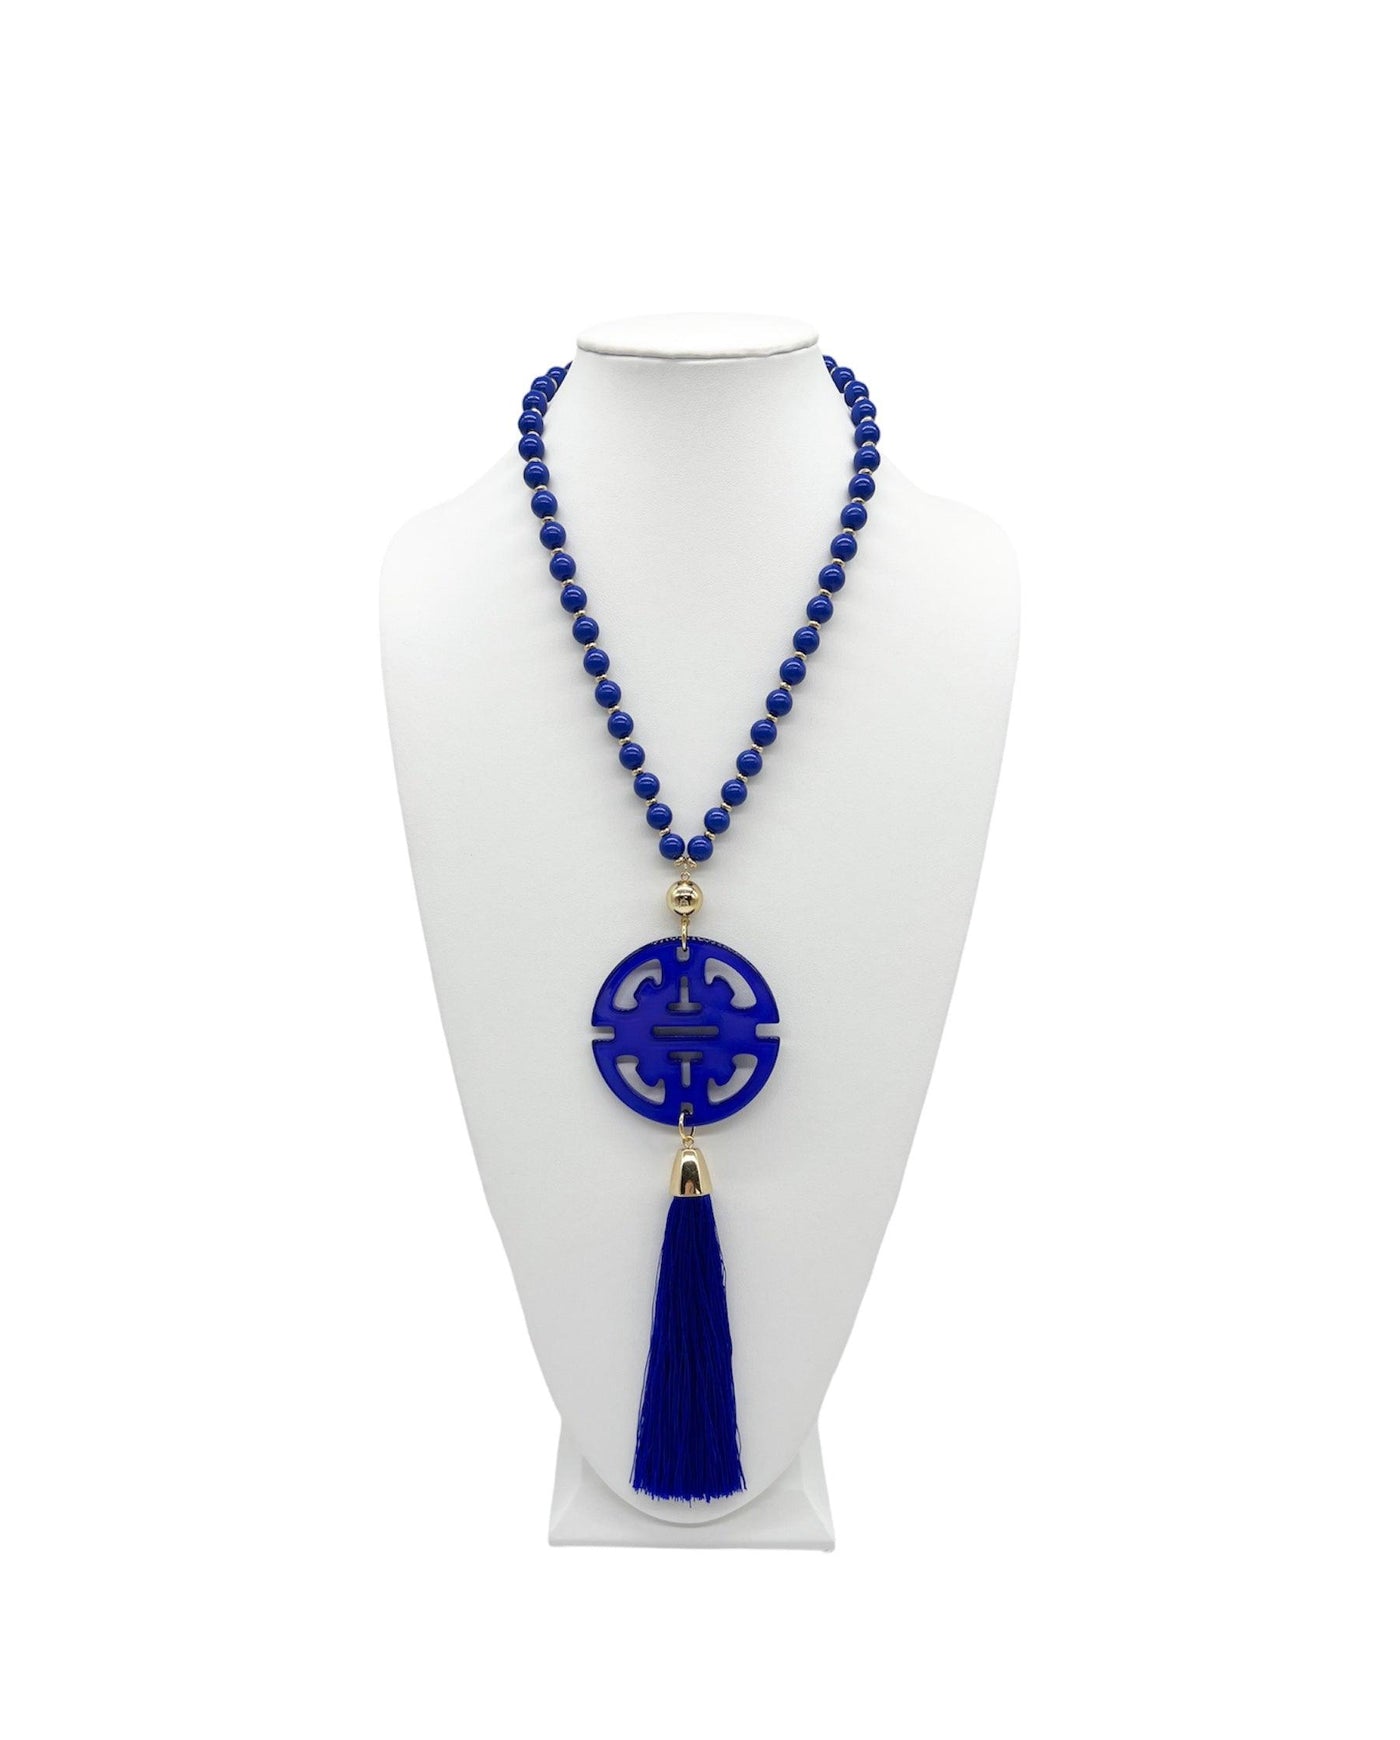 Blue beaded resin pendant and tassel necklace